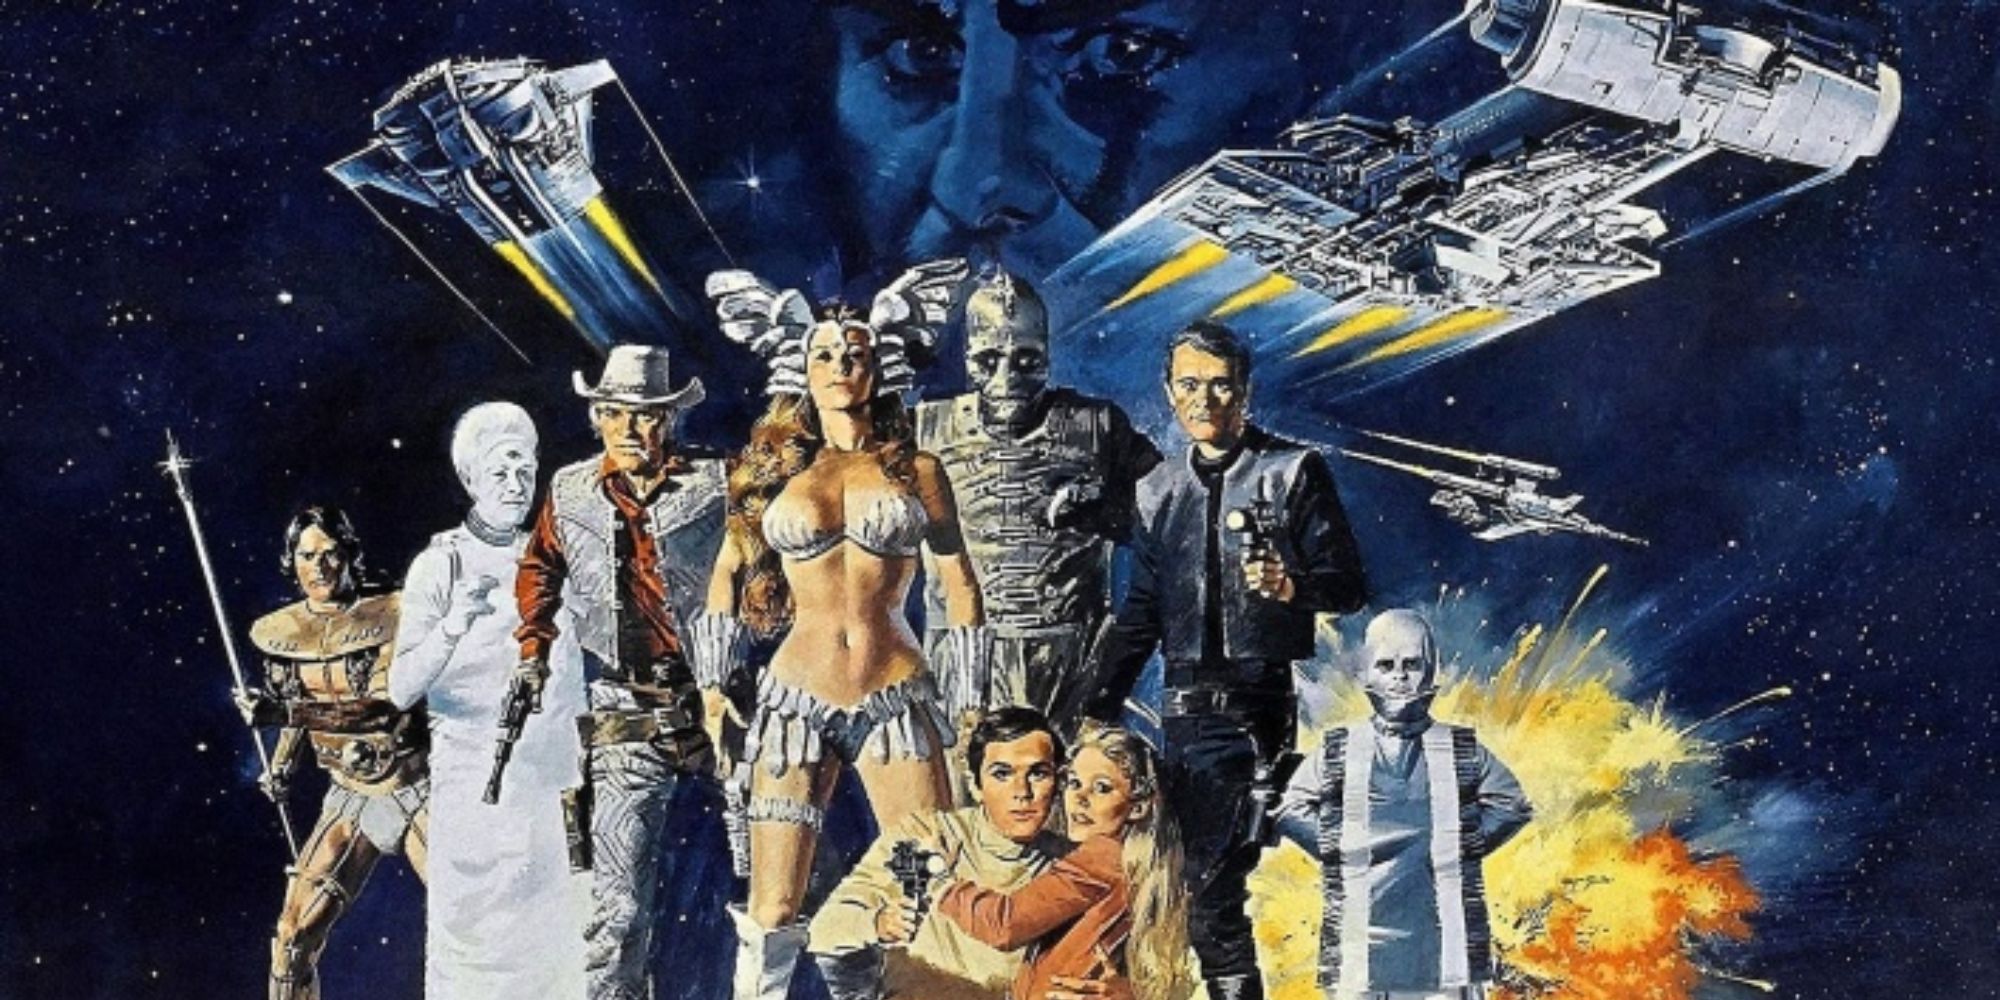 Poster for Battle Beyond the Stars (1980)